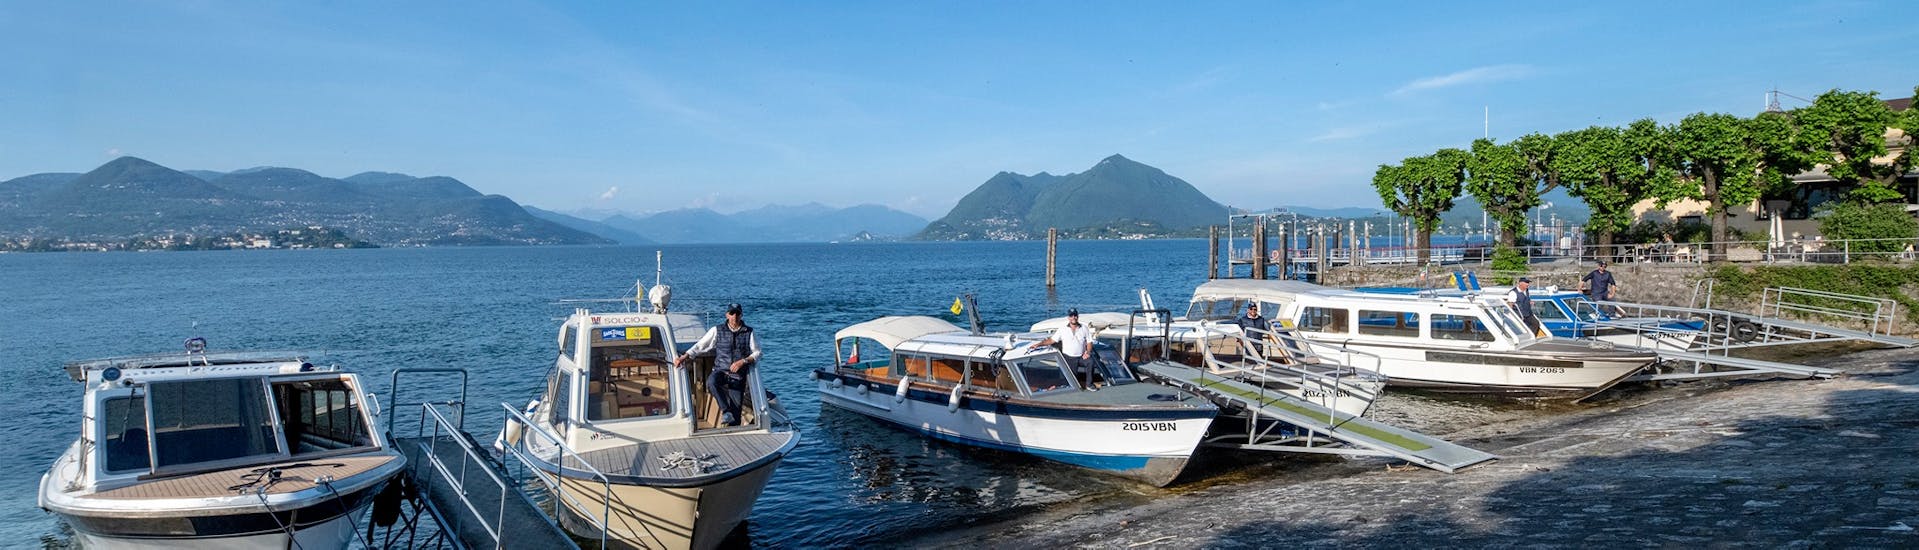 View of the boats used for the Boat Transfer from Stresa to Isola Madre, Isola Pescatori and Isola Bella with Lake Tours Stresa.